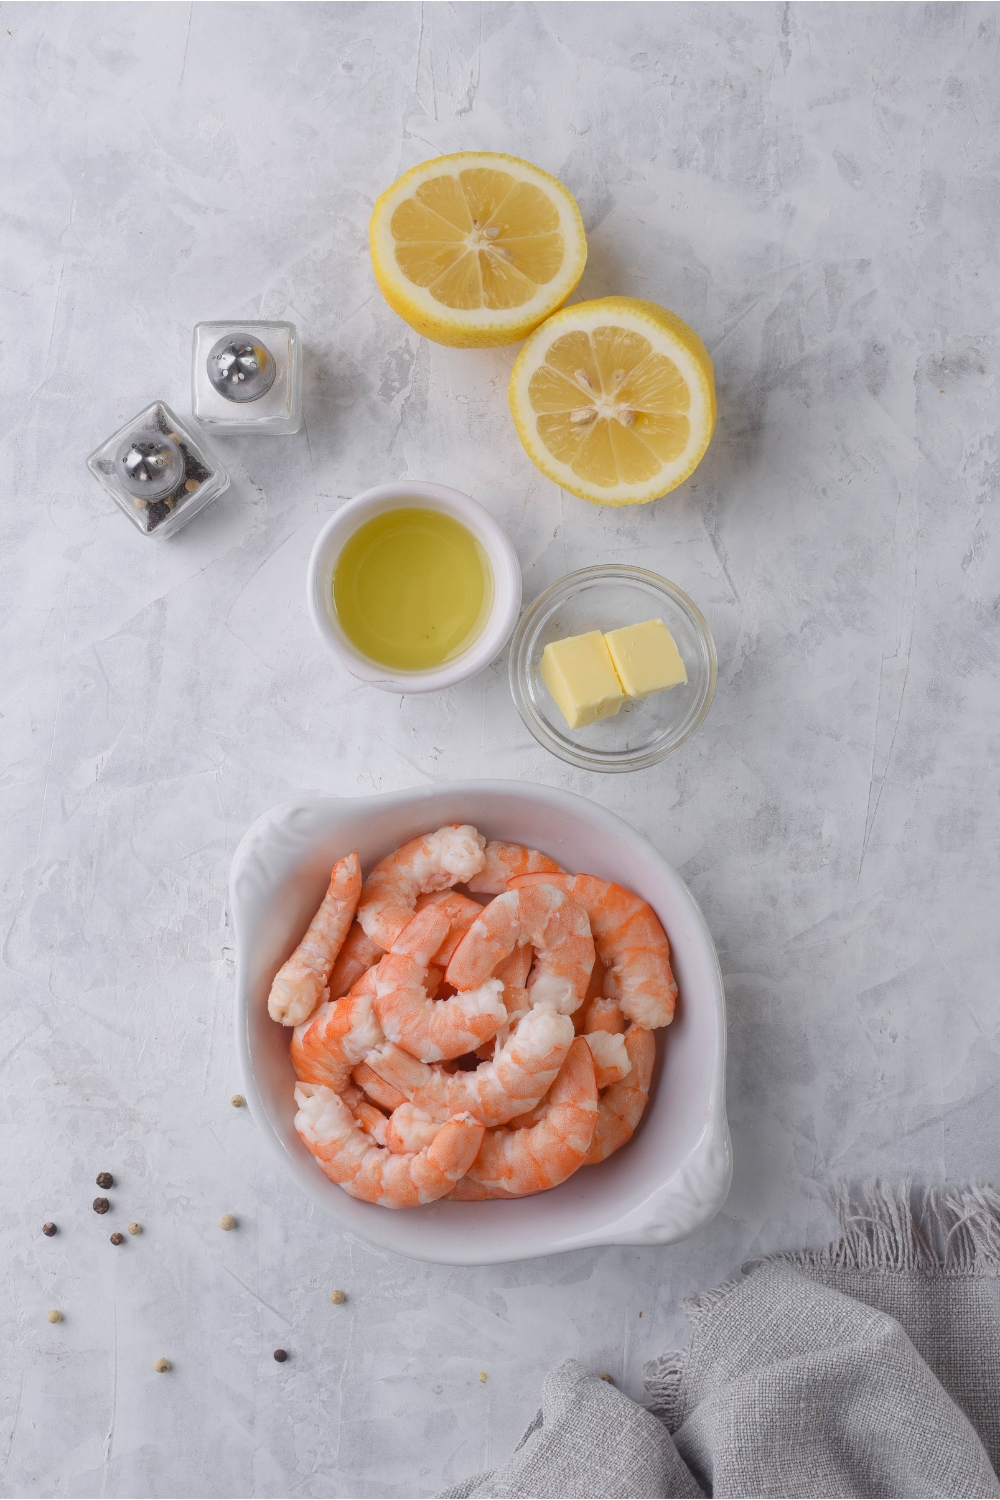 An assortment of ingredients including a bowl of shrimp, smaller bowls of butter and oil, salt and pepper shakers, and a lemon cut in half.